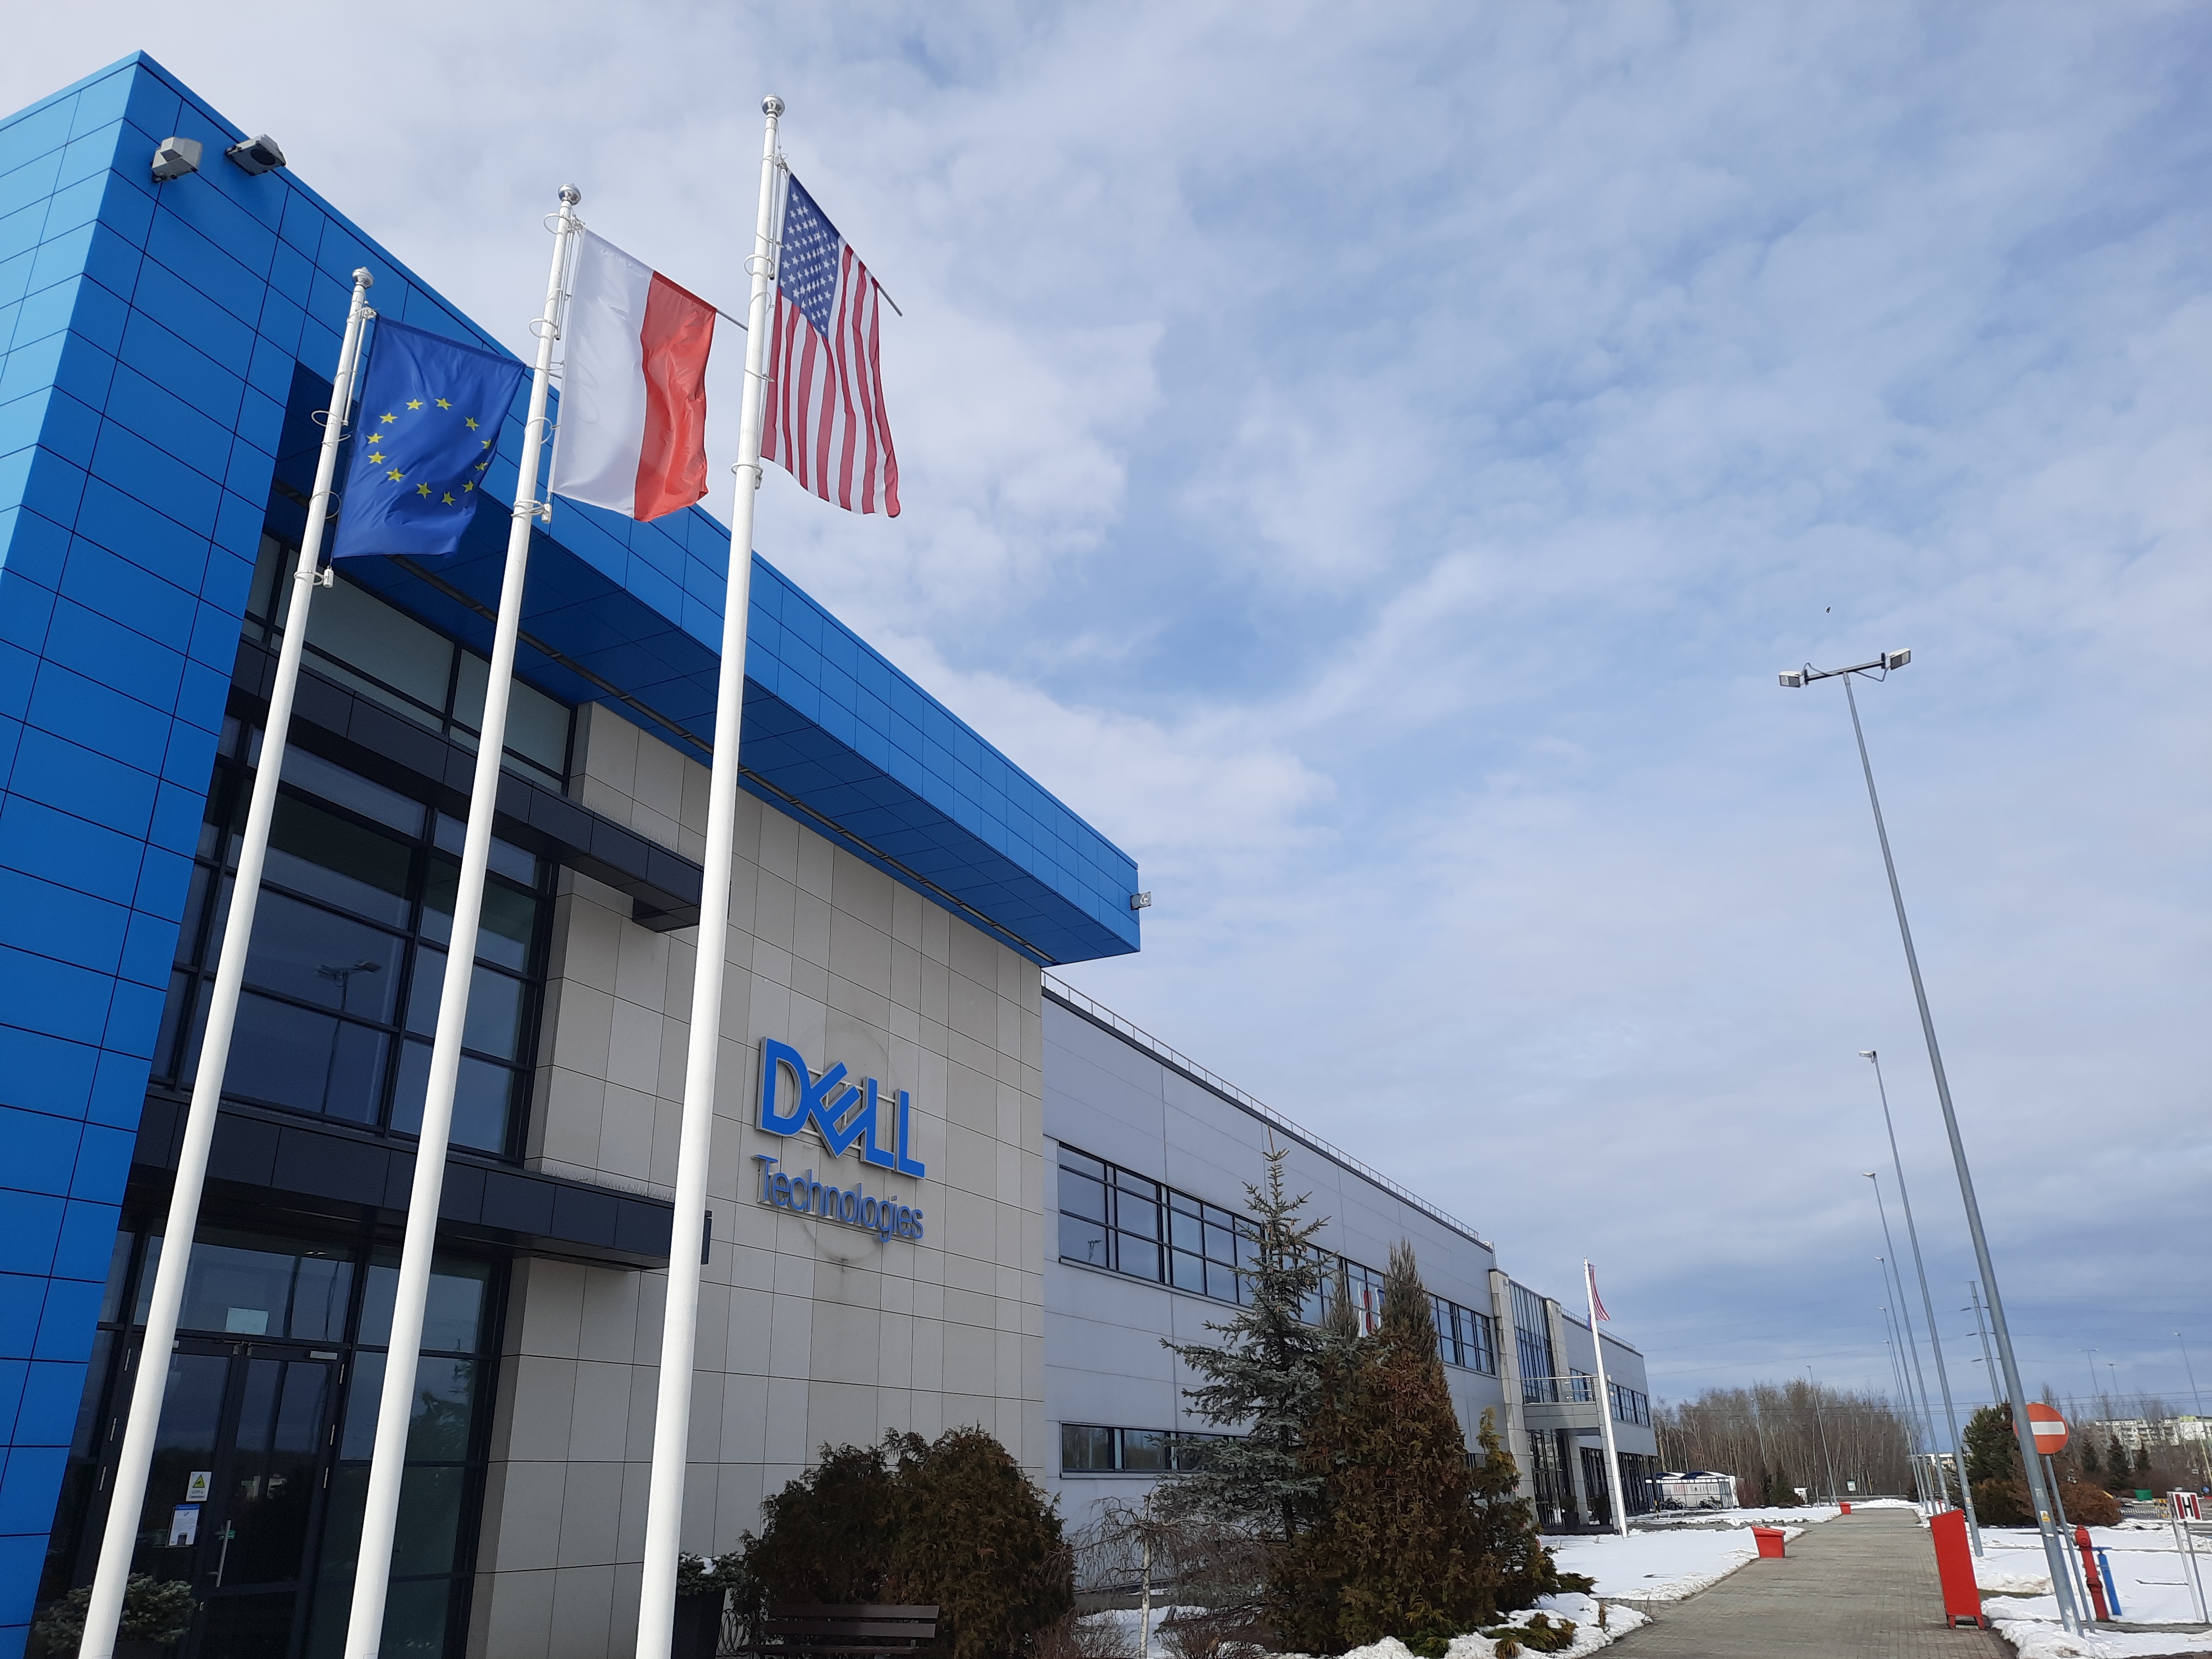 Intratel takes customers on a factory tour of Dell Technologies in Łódź, Poland